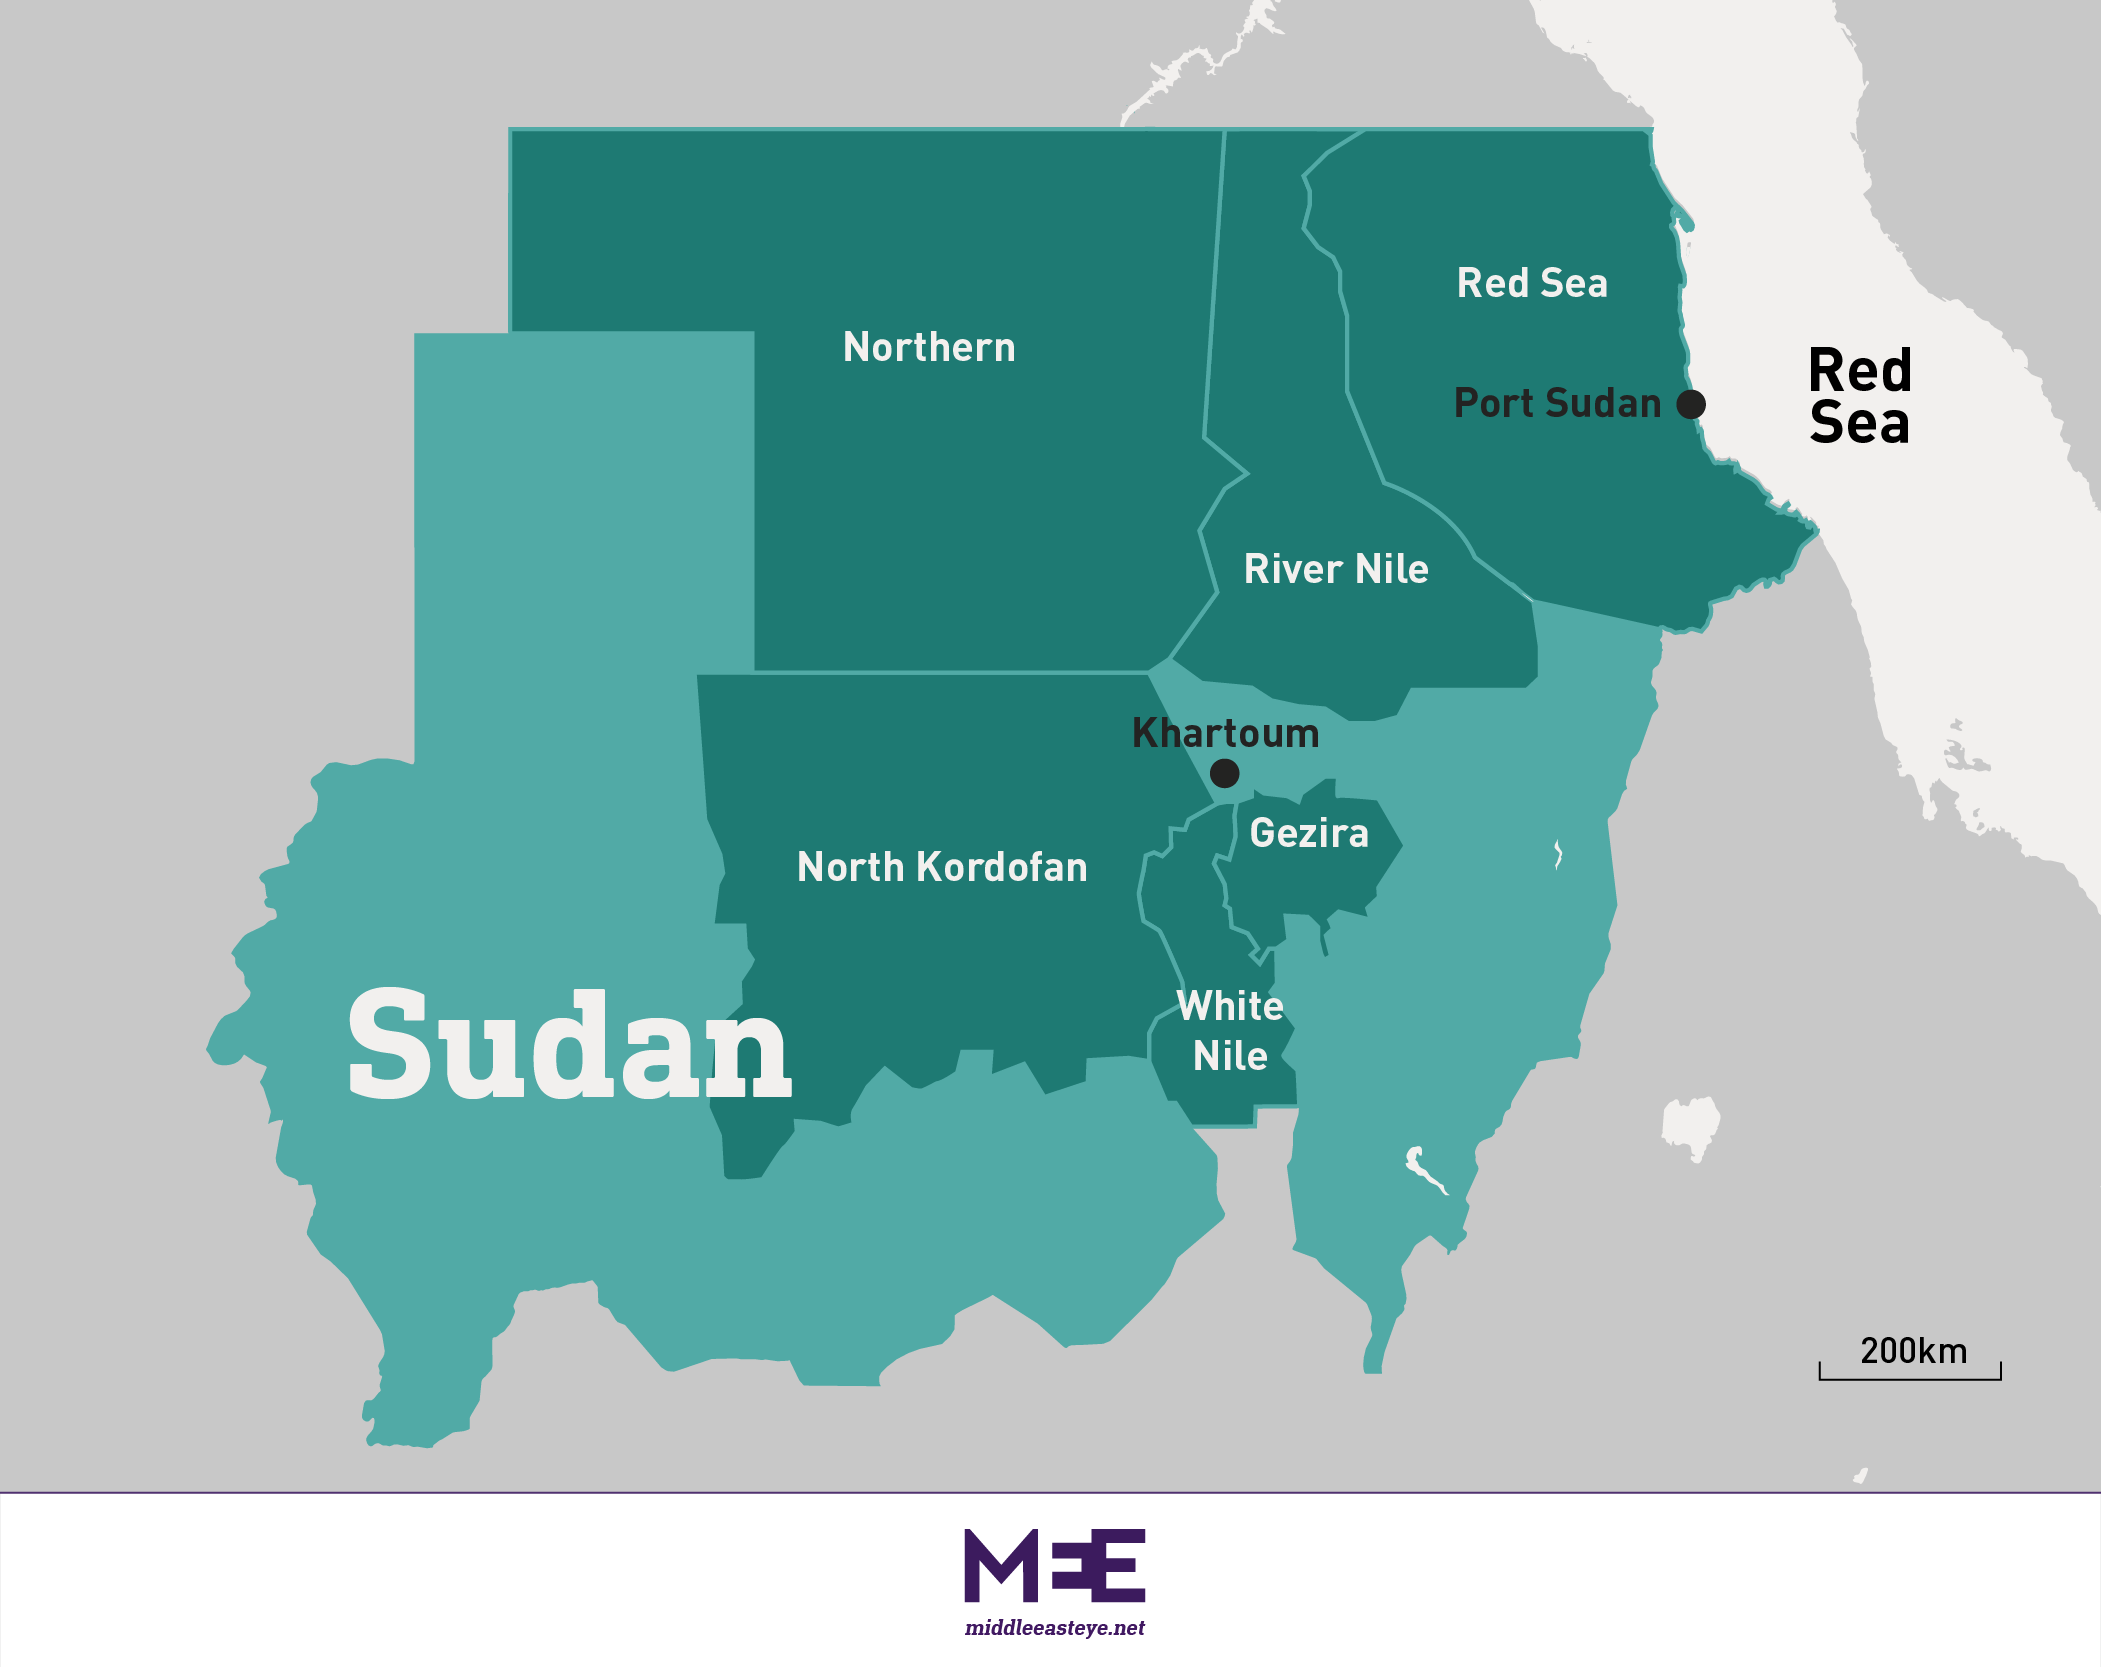 Sudan Battle of the blockades as protesters plot to choke off military